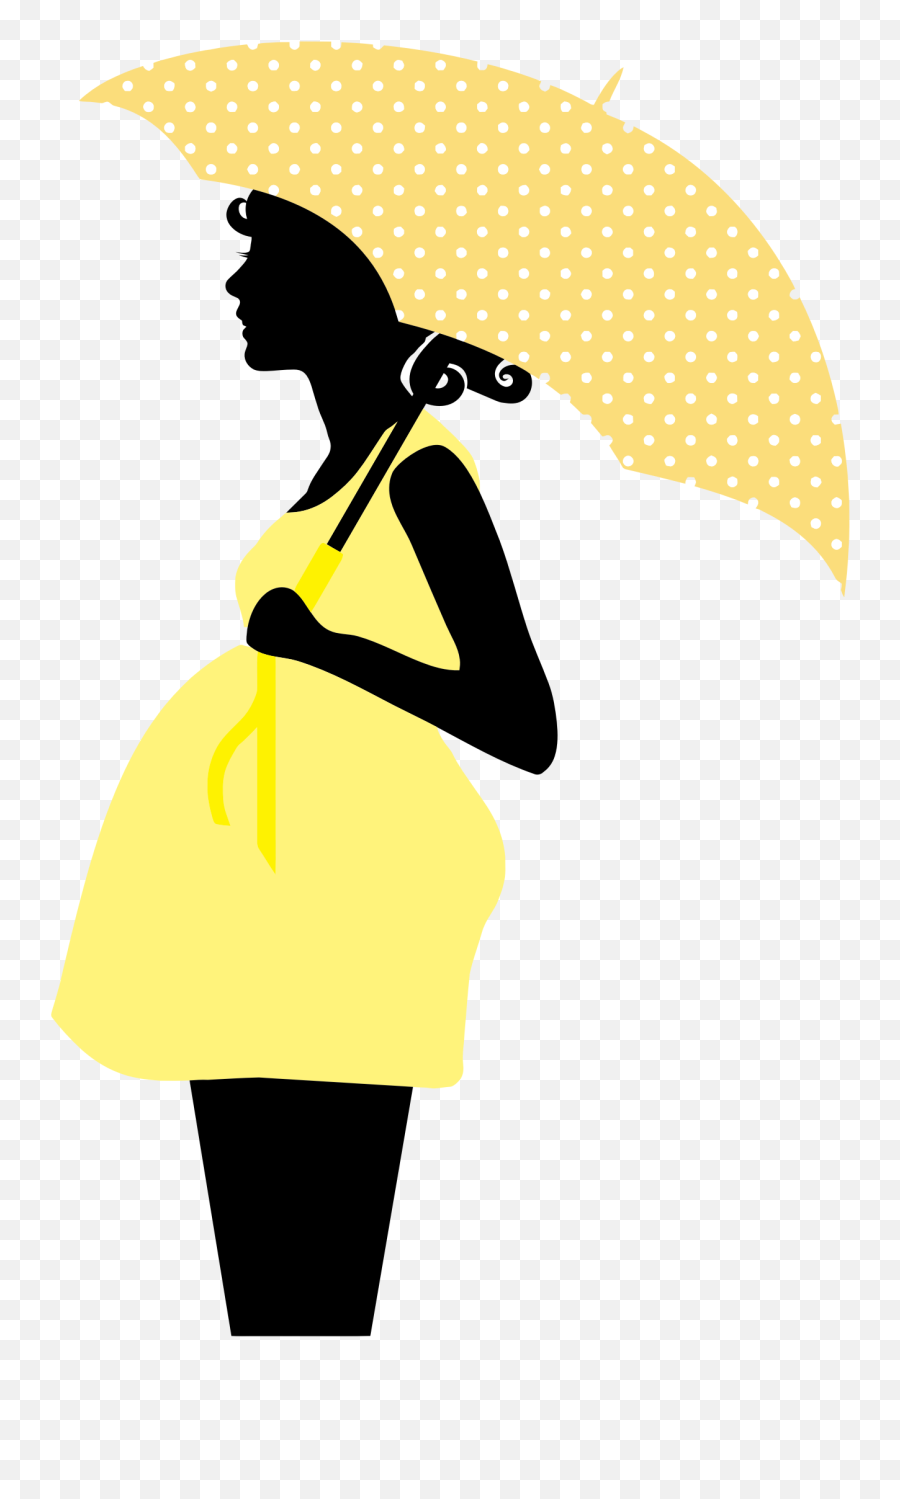 Free Icons Png Design Of Pregnant Woman - Pregnant Lady Clip Art,Pregnant Png